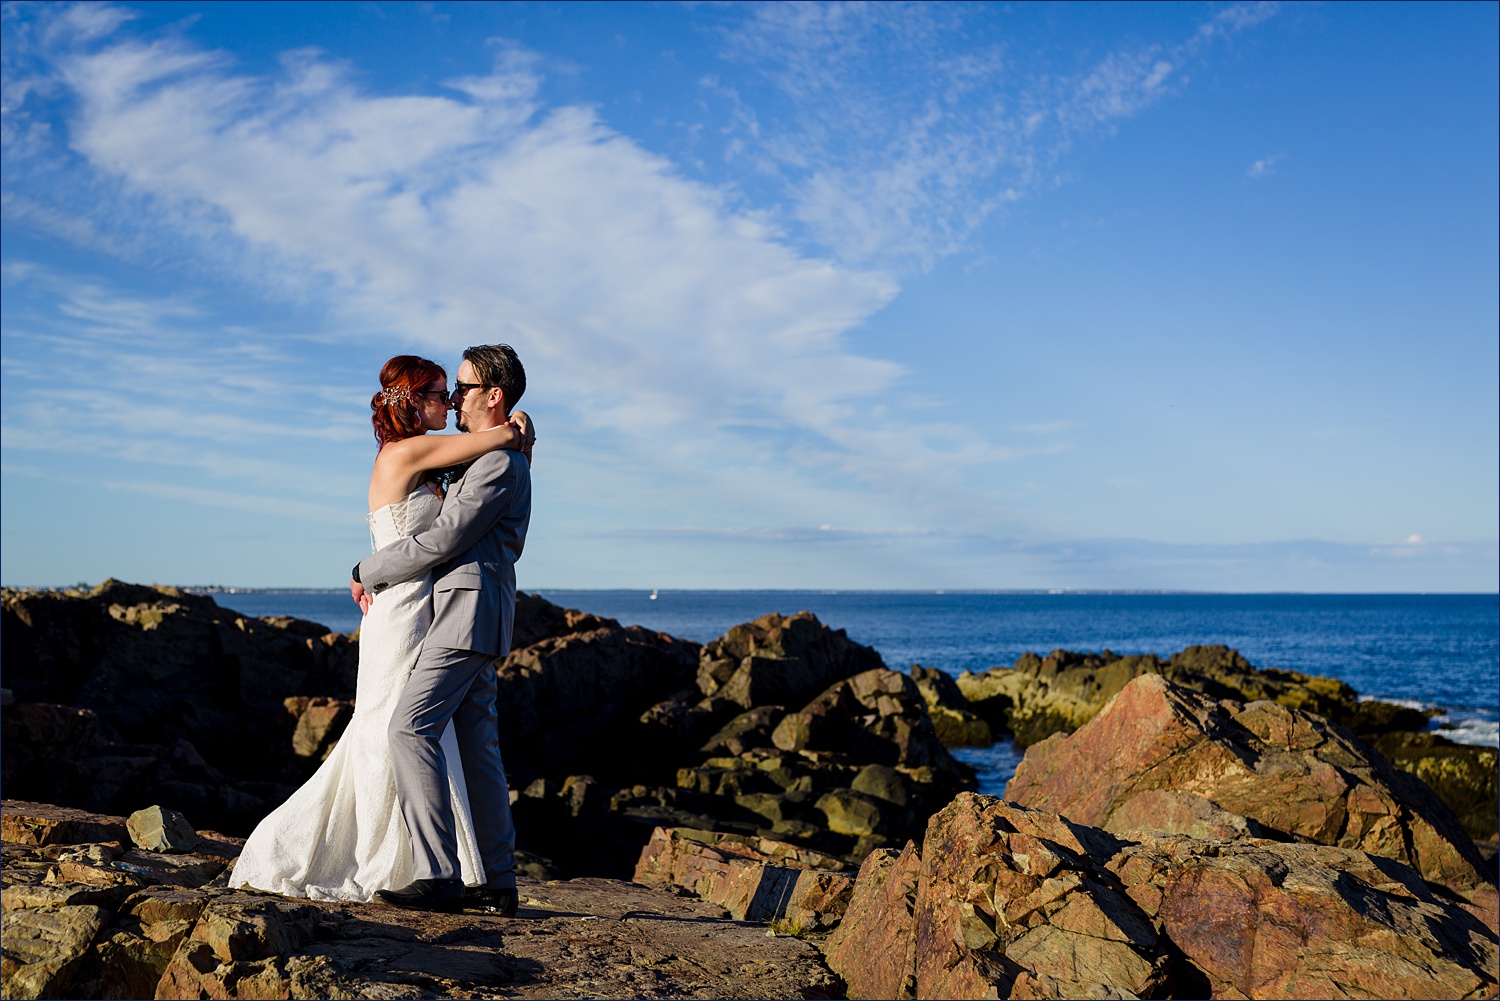 The bride and groom kiss out on the rocks of Ogunquit Maine elopement